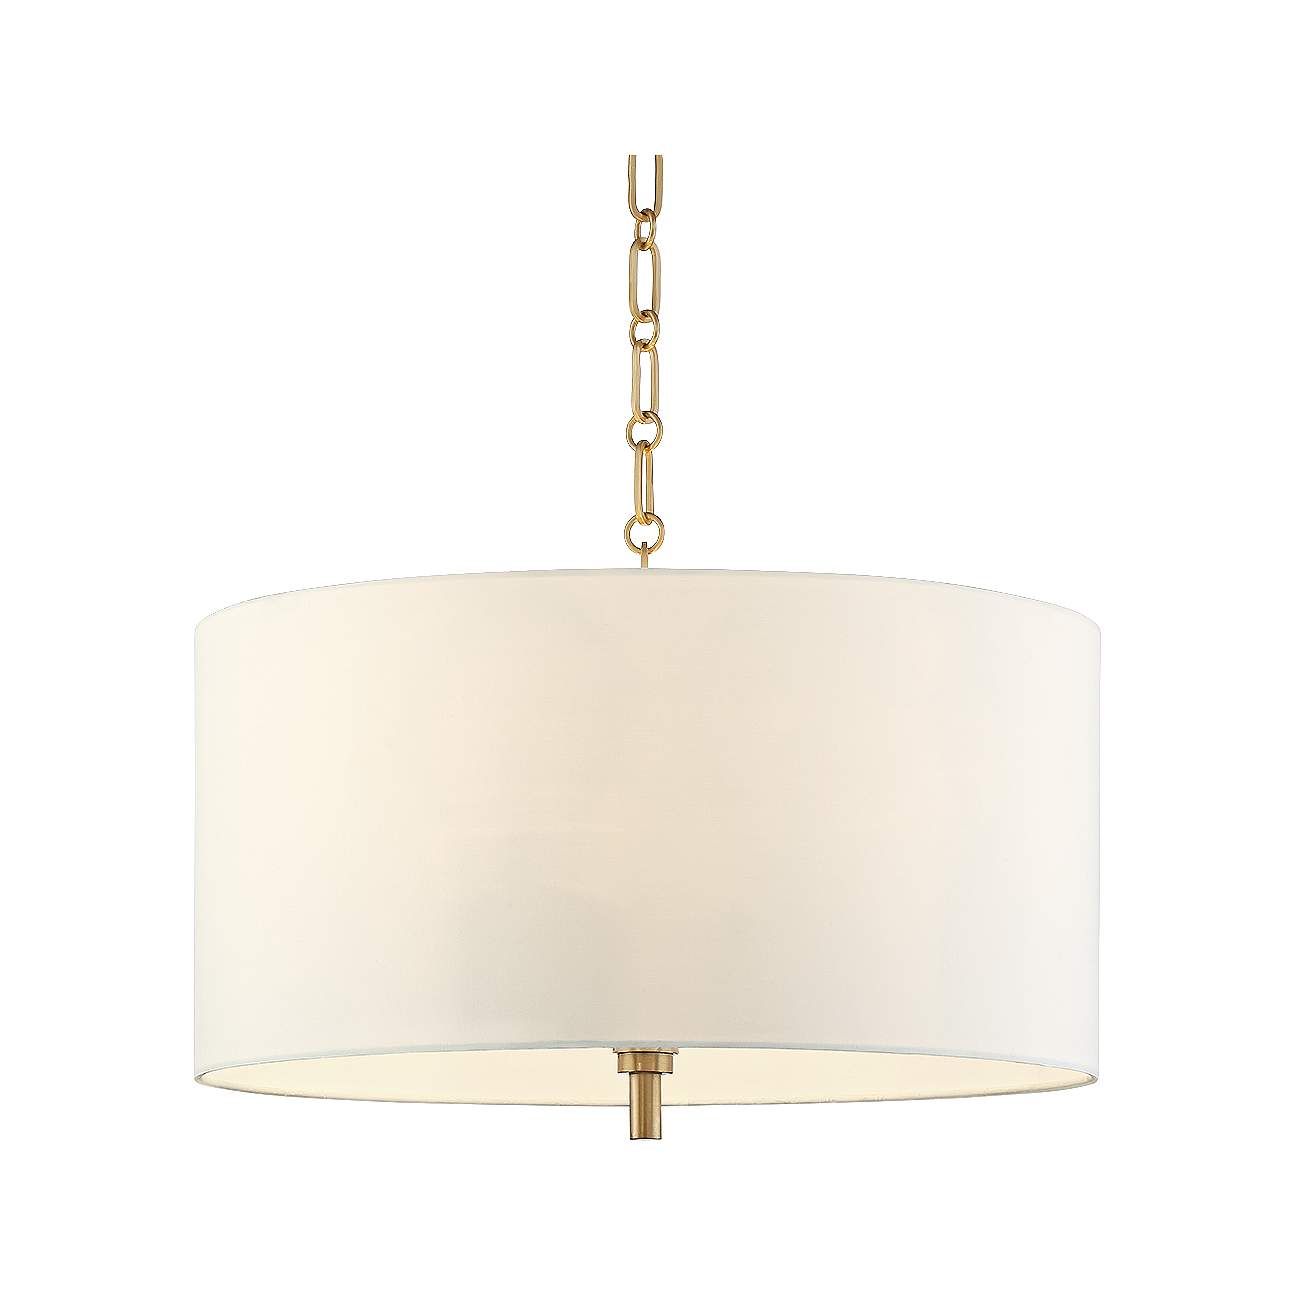 20" Wide Warm Gold Pendant Light with White Shade | LampsPlus.com